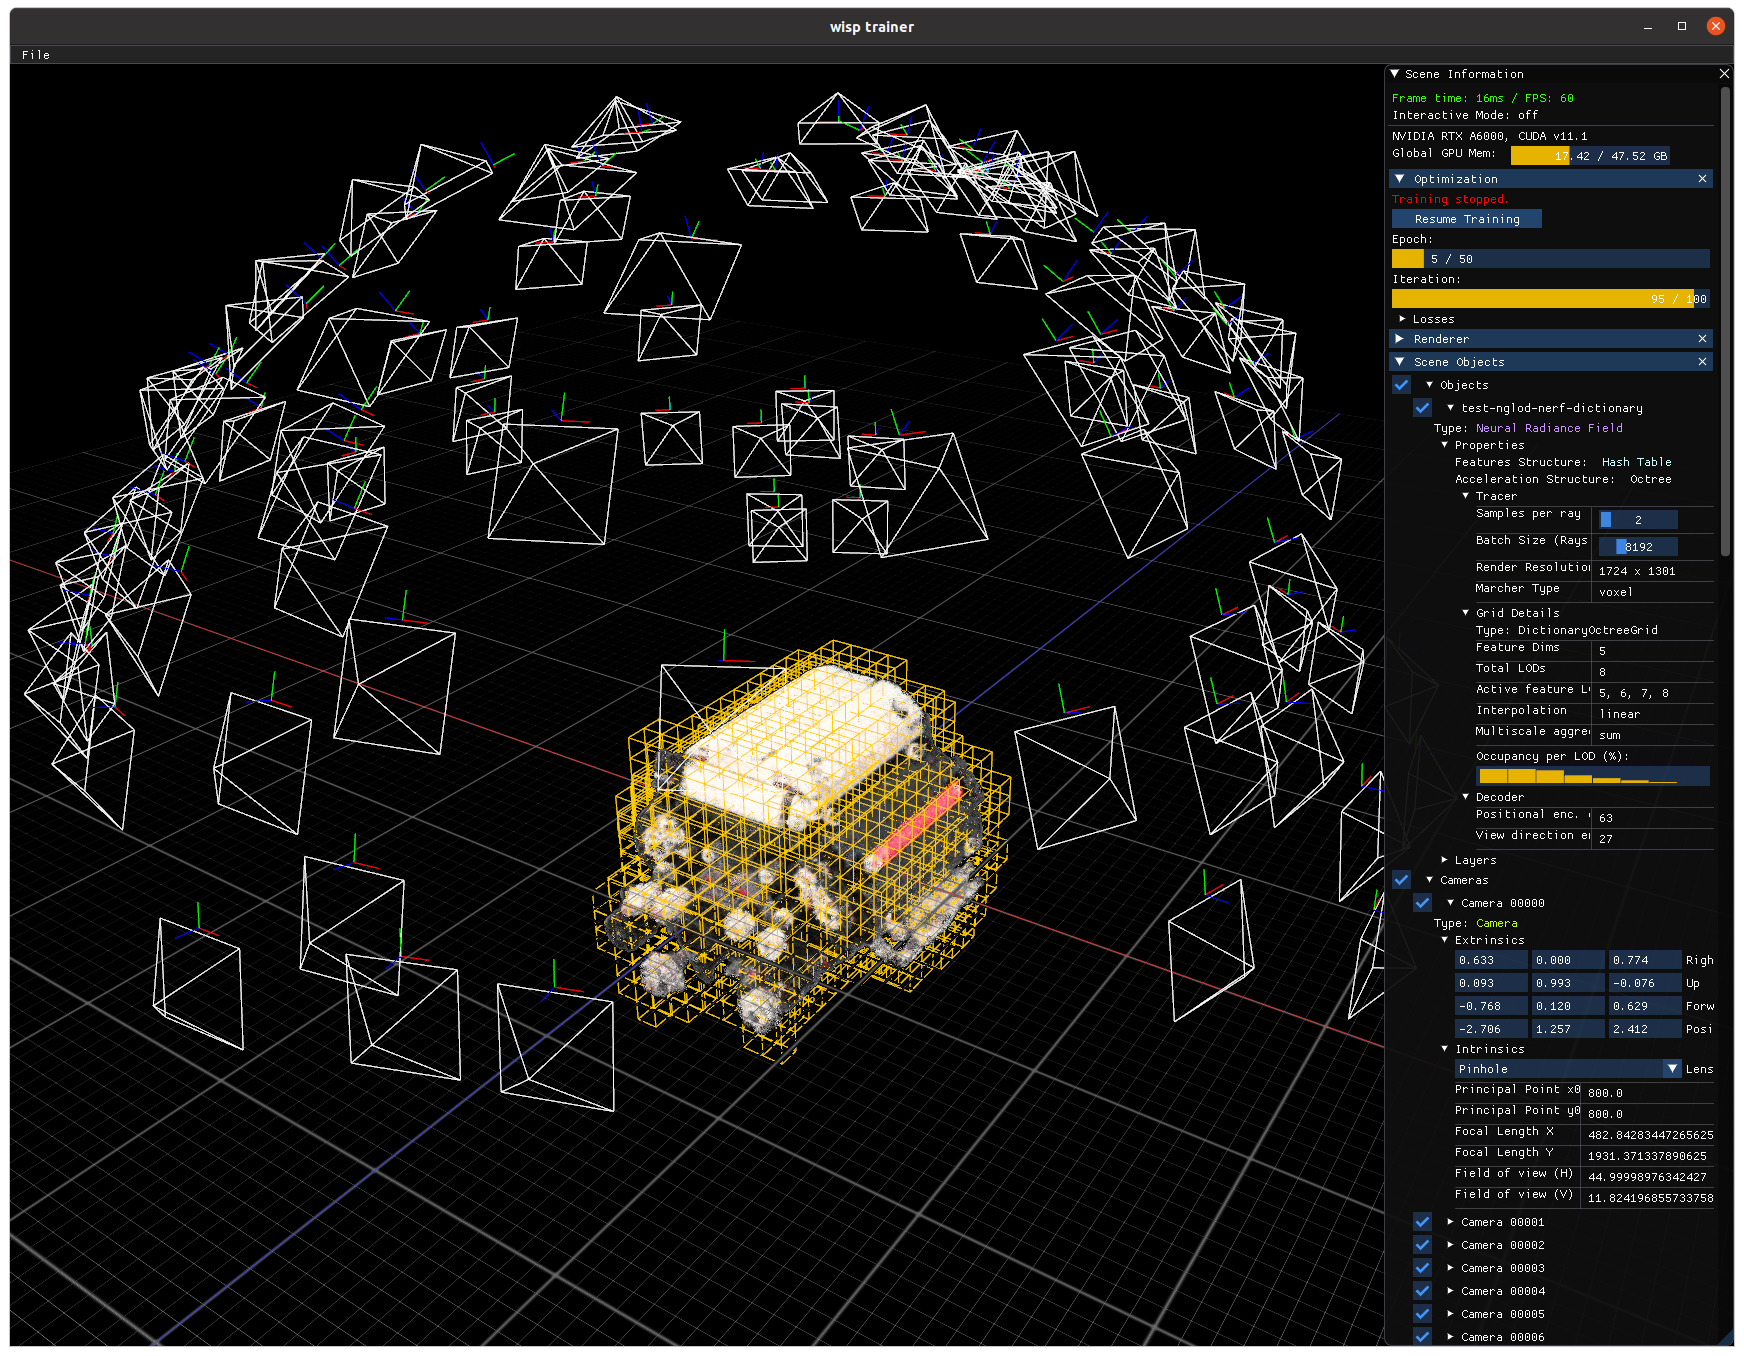 A screenshot of NVIDIA Kaolin Wisp renders a lego engine's neural field and shows the software's user interface.